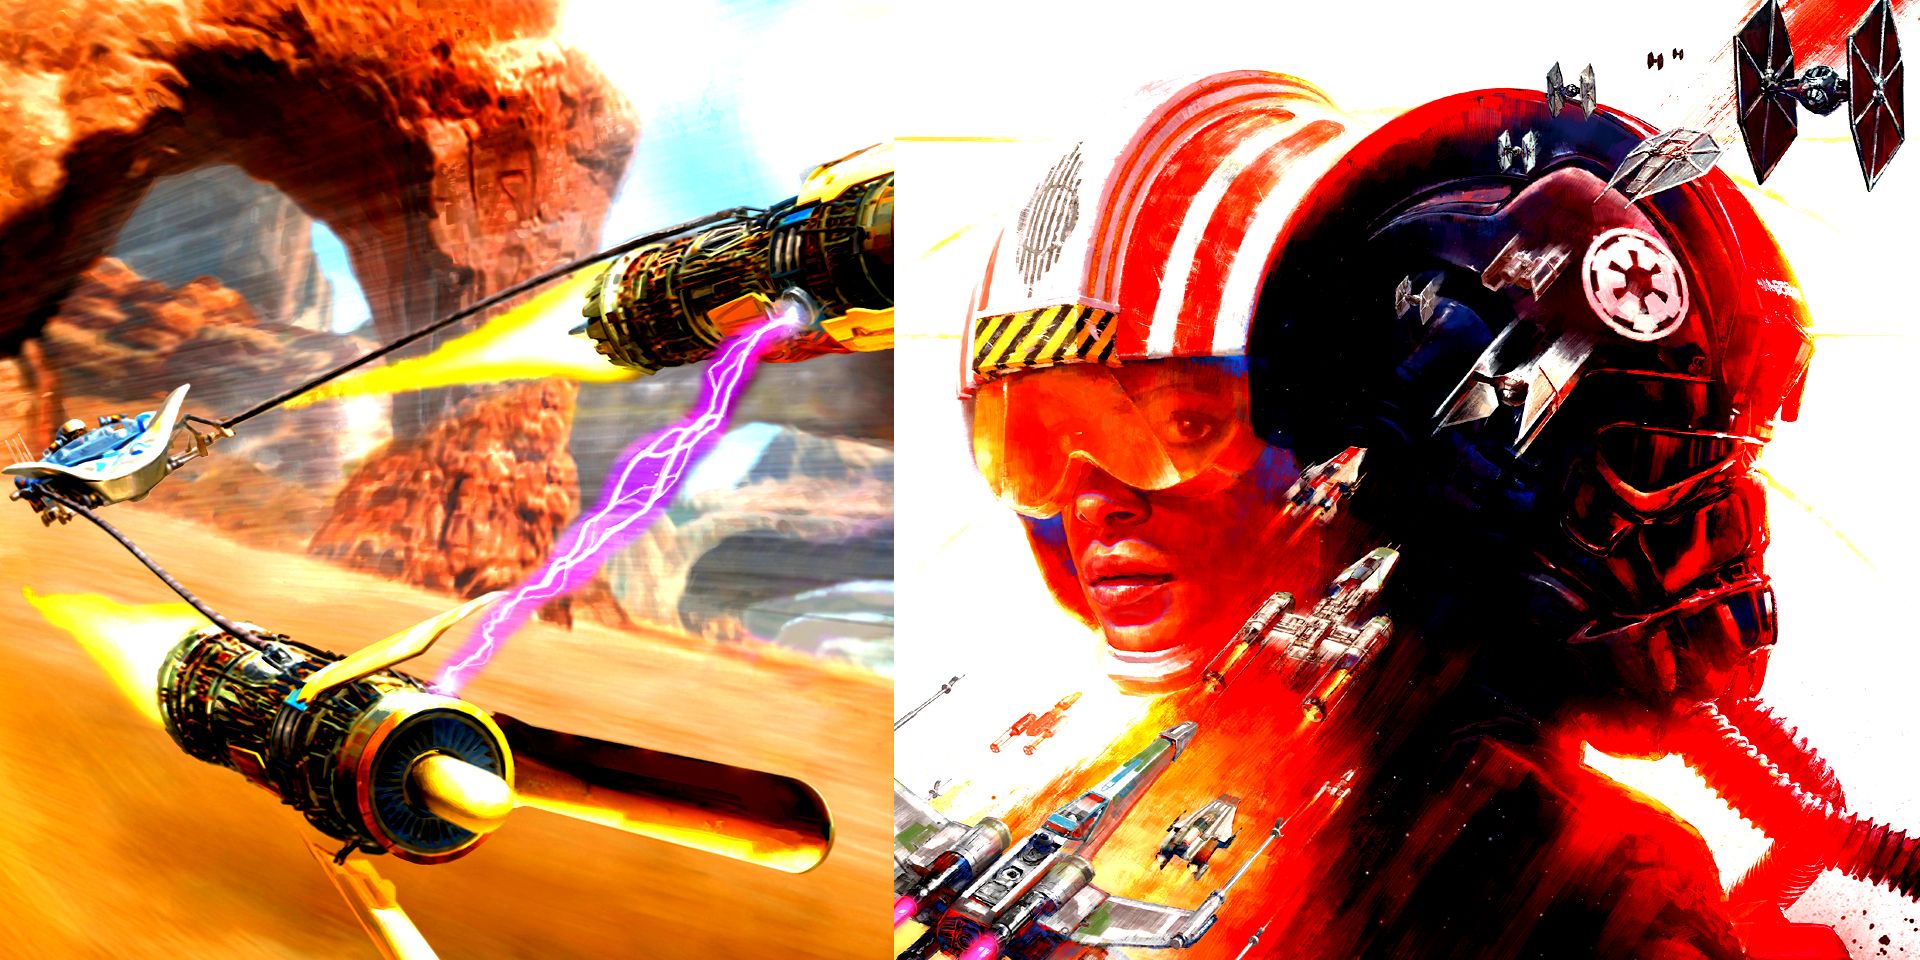 Star Wars Racer and Star Wars Squadrons covers.